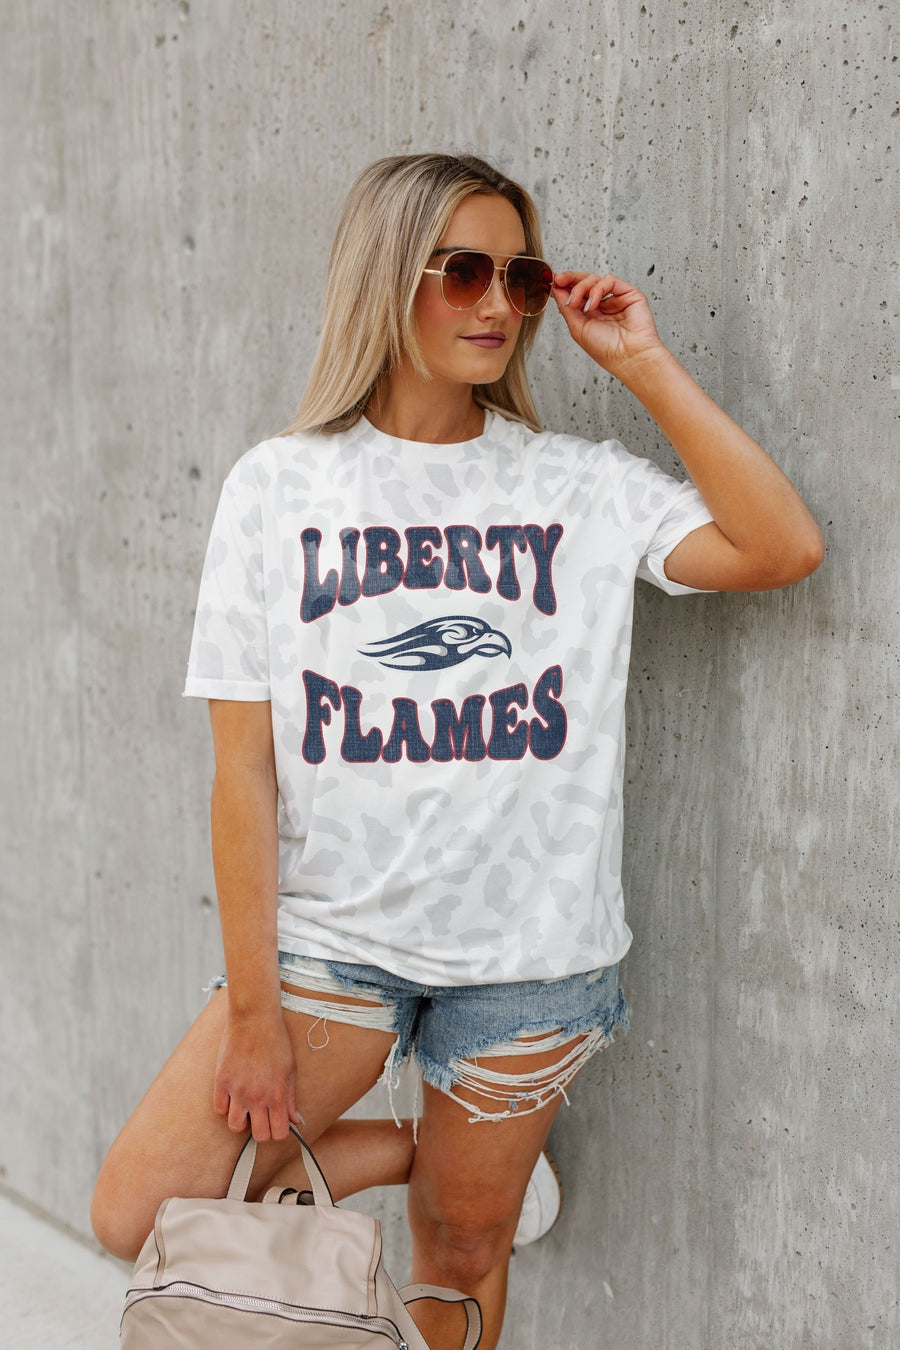 LIBERTY FLAMES CRUSHING VICTORY SUBTLE LEOPARD PRINT TEE